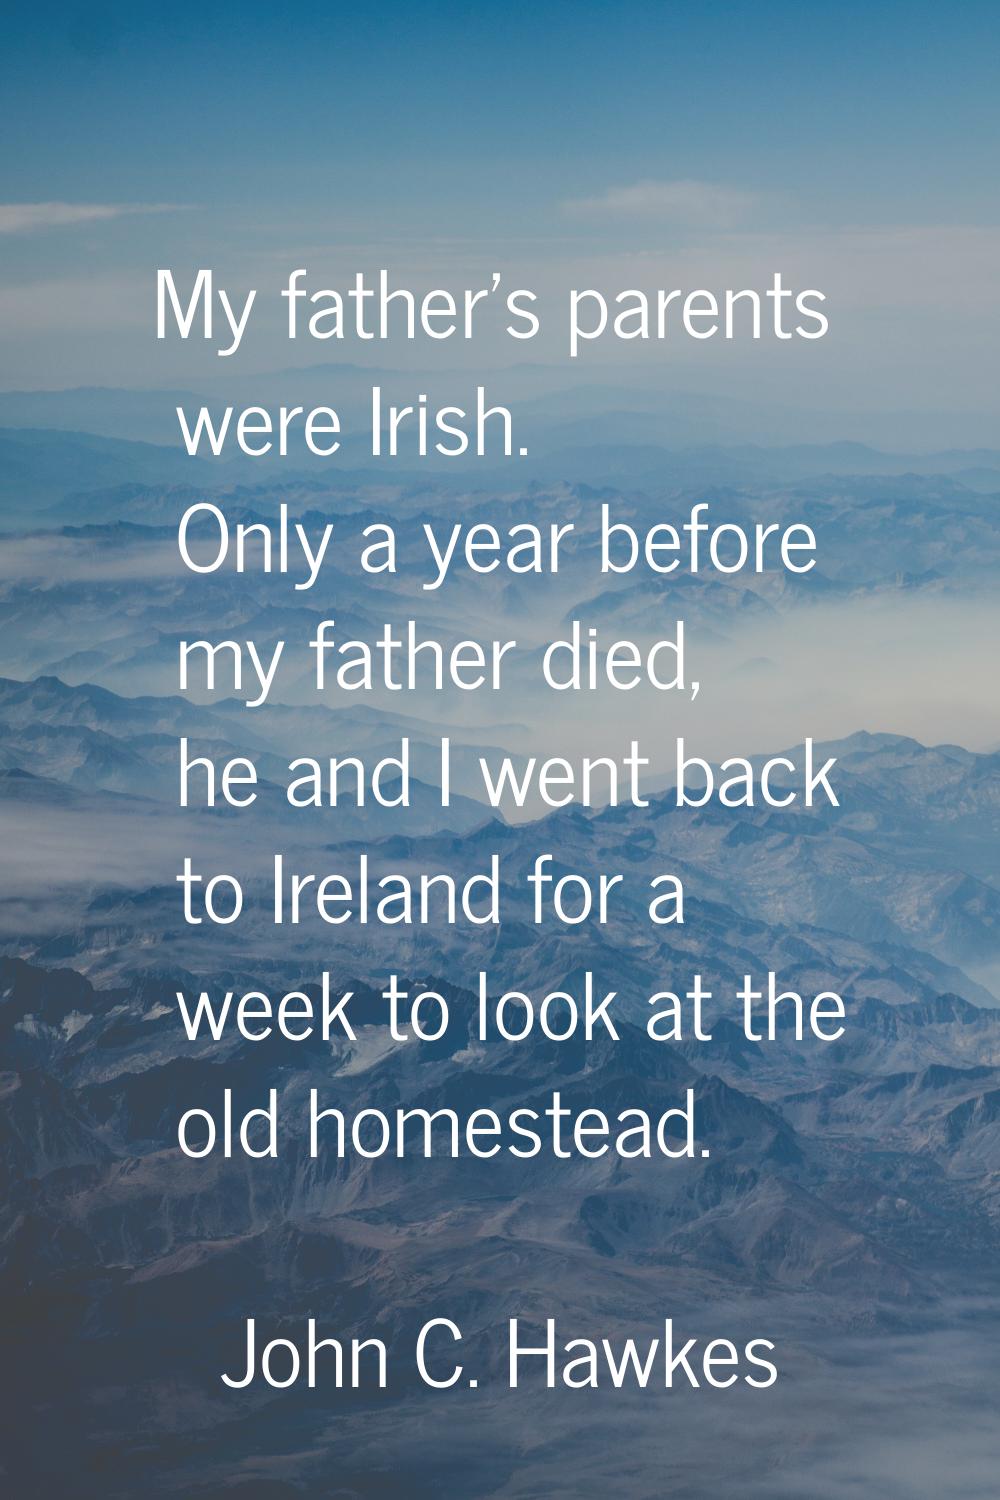 My father's parents were Irish. Only a year before my father died, he and I went back to Ireland fo